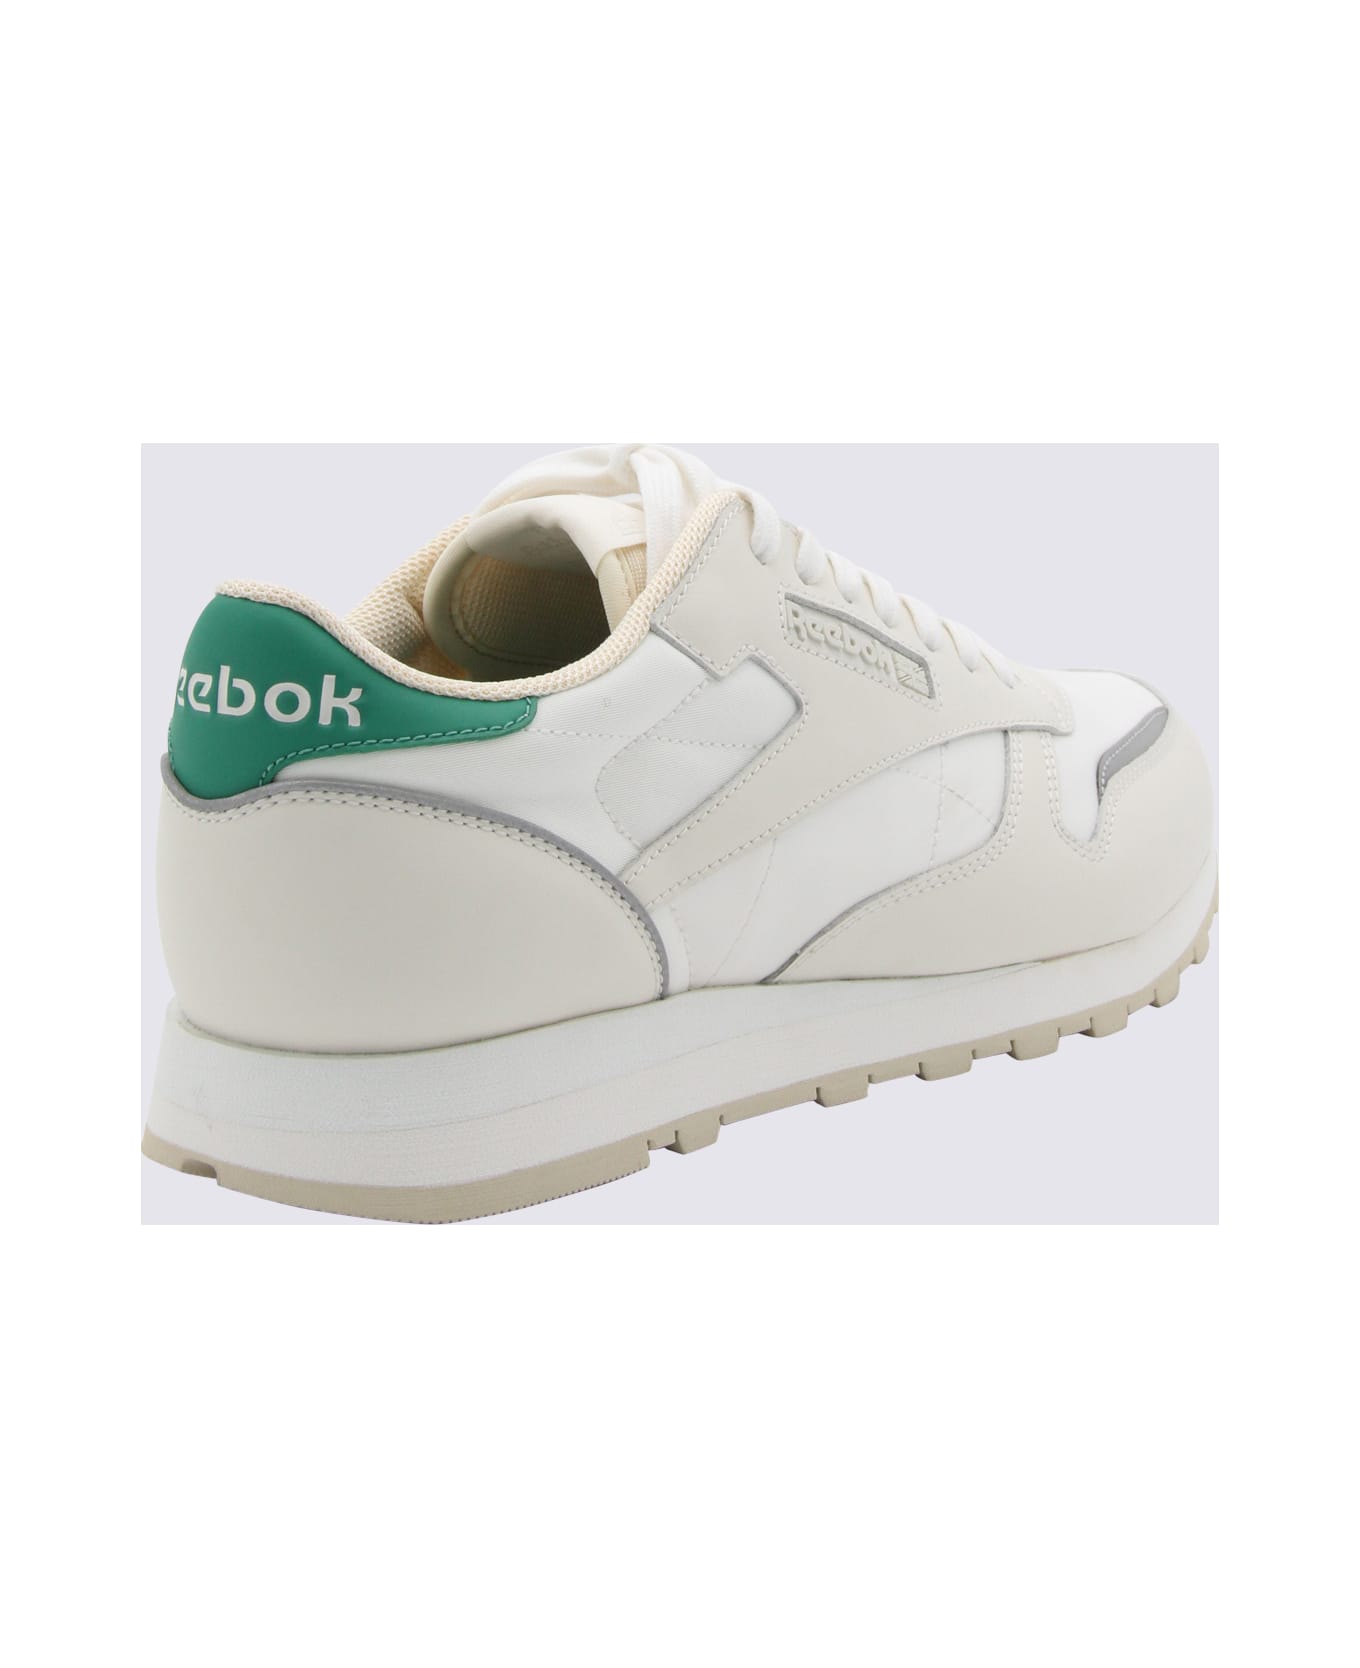 Reebok White And Green Leather Sneakers - White